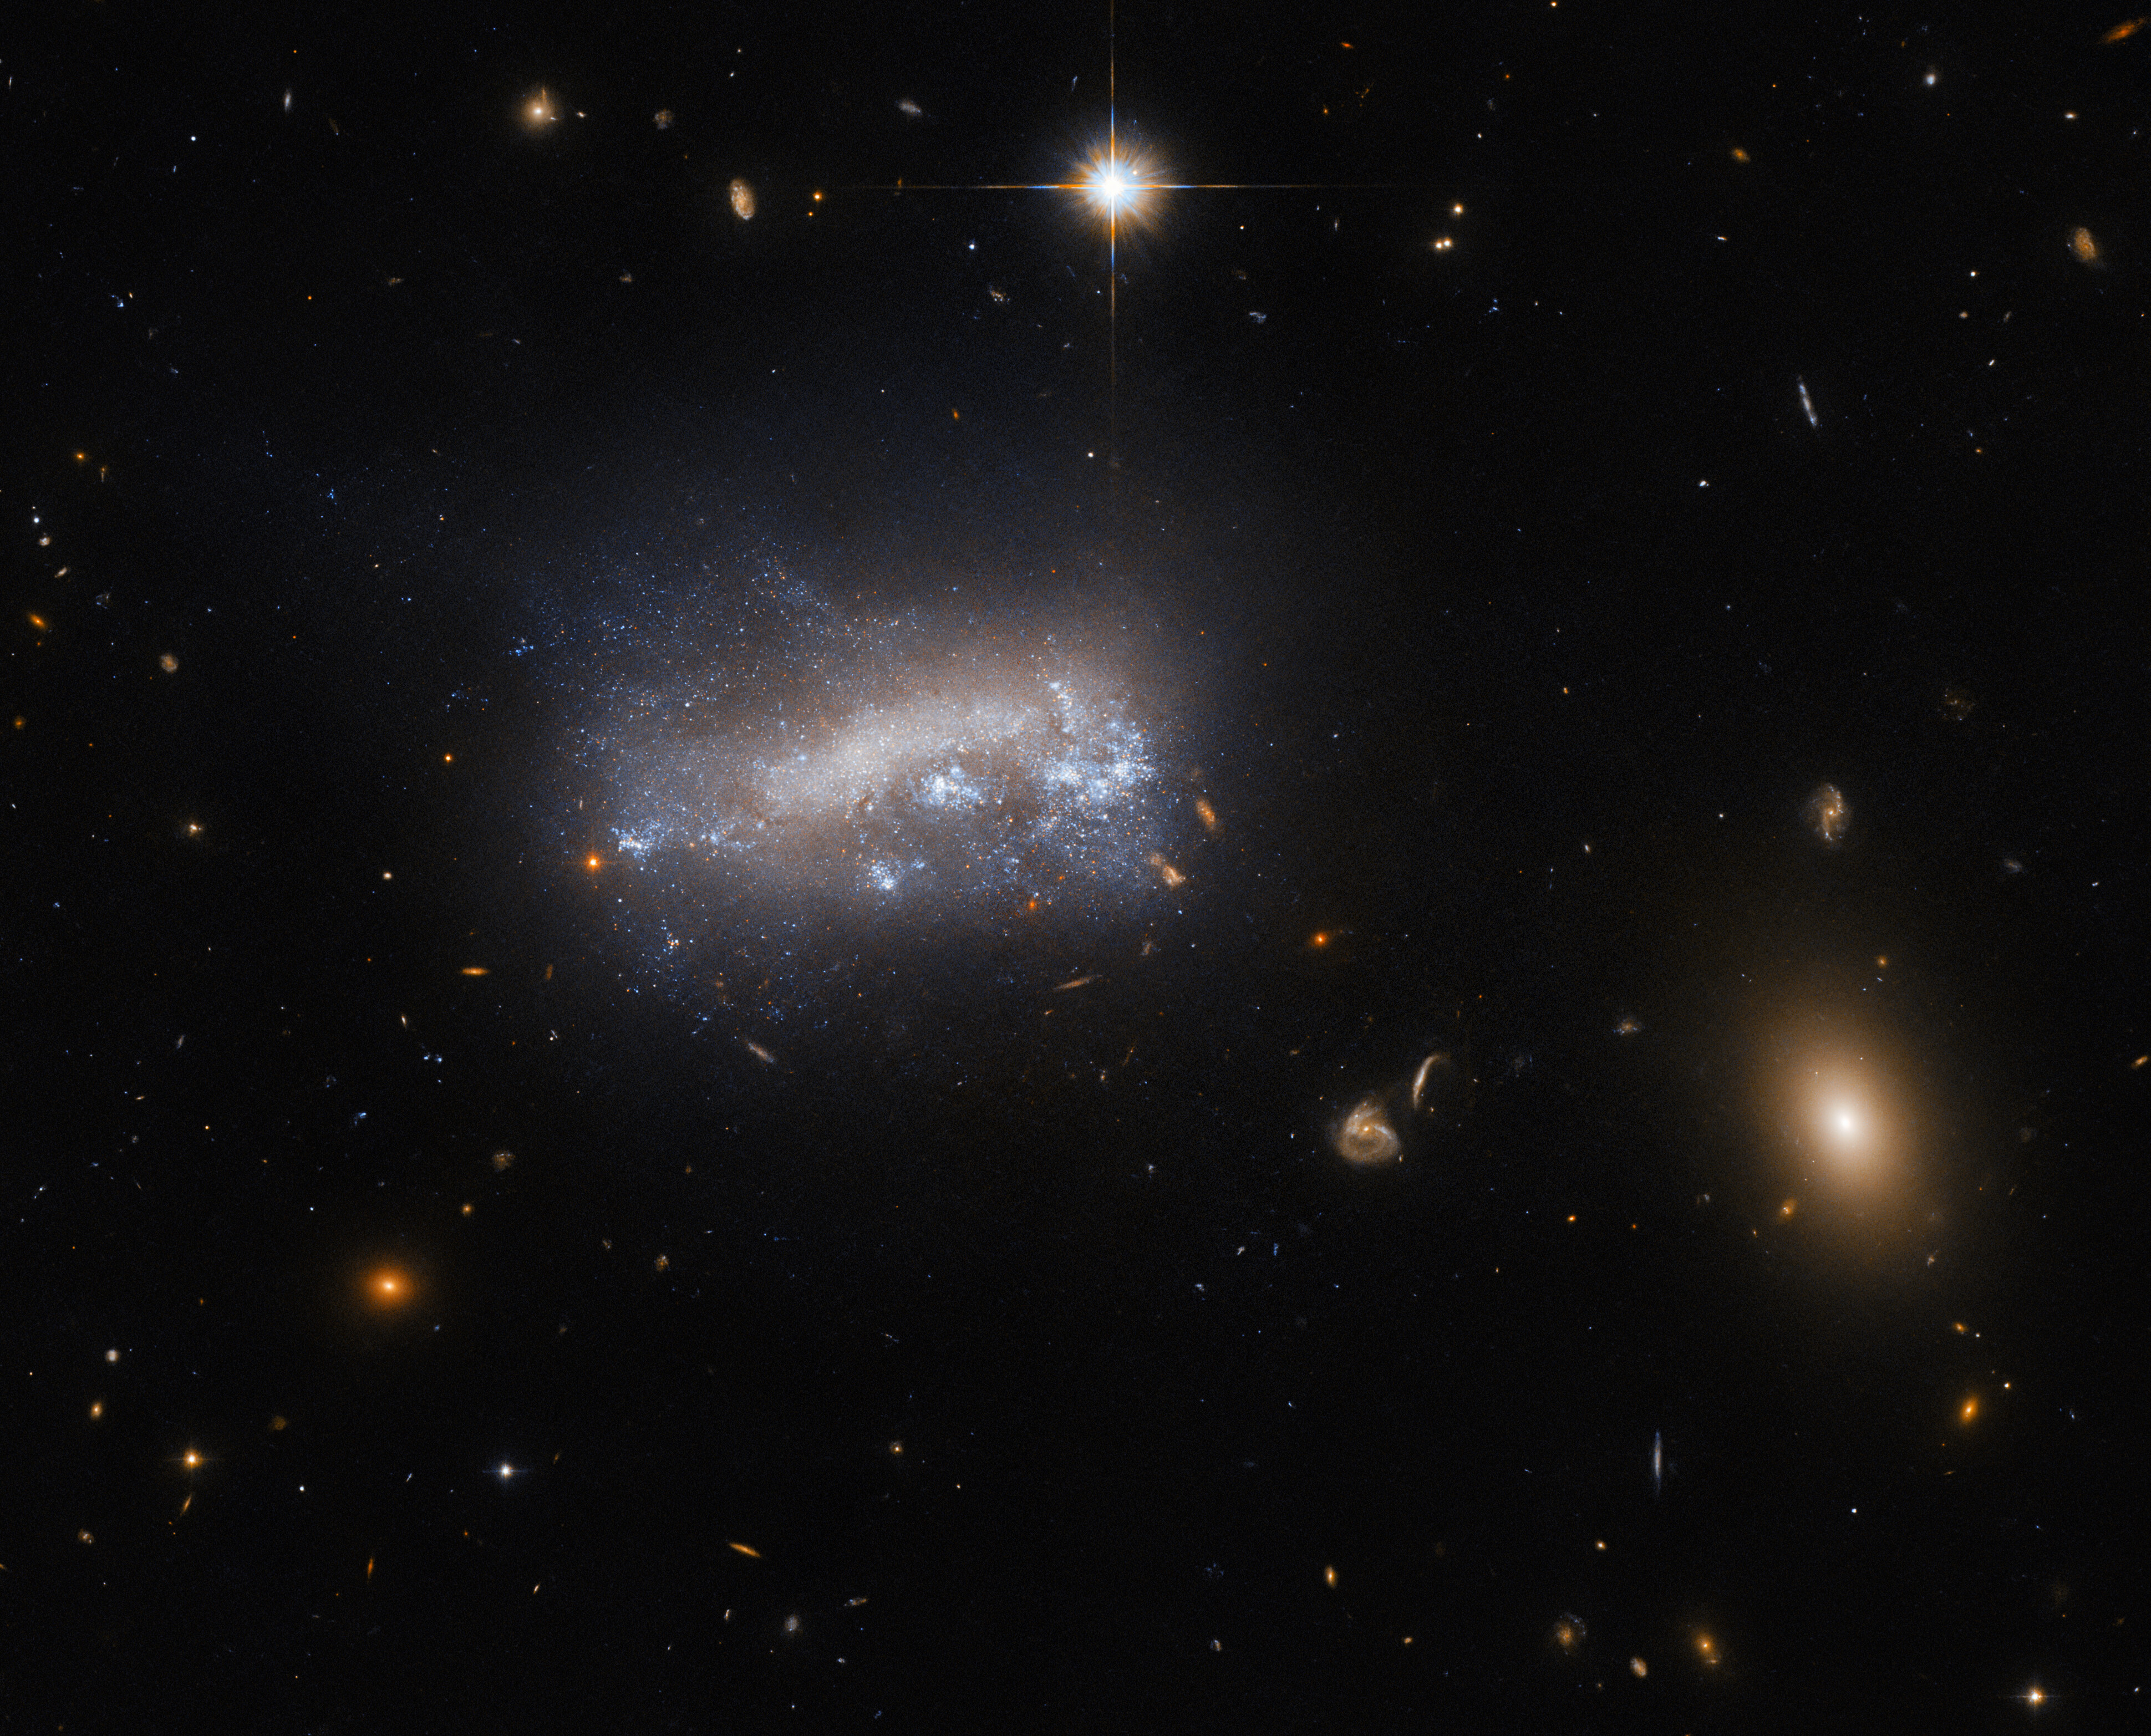 A distorted dwarf galaxy, obscured by dust and by bright outbursts caused by star formation, floats roughly in the center. Tendrils of gas stretch up from the plane of the galaxy. A few distant galaxies are visible in the background around it, many as little spirals, and also including a prominent elliptical galaxy. A bright star hangs above the galaxy in the foreground, marked by cross-shaped diffraction spikes.